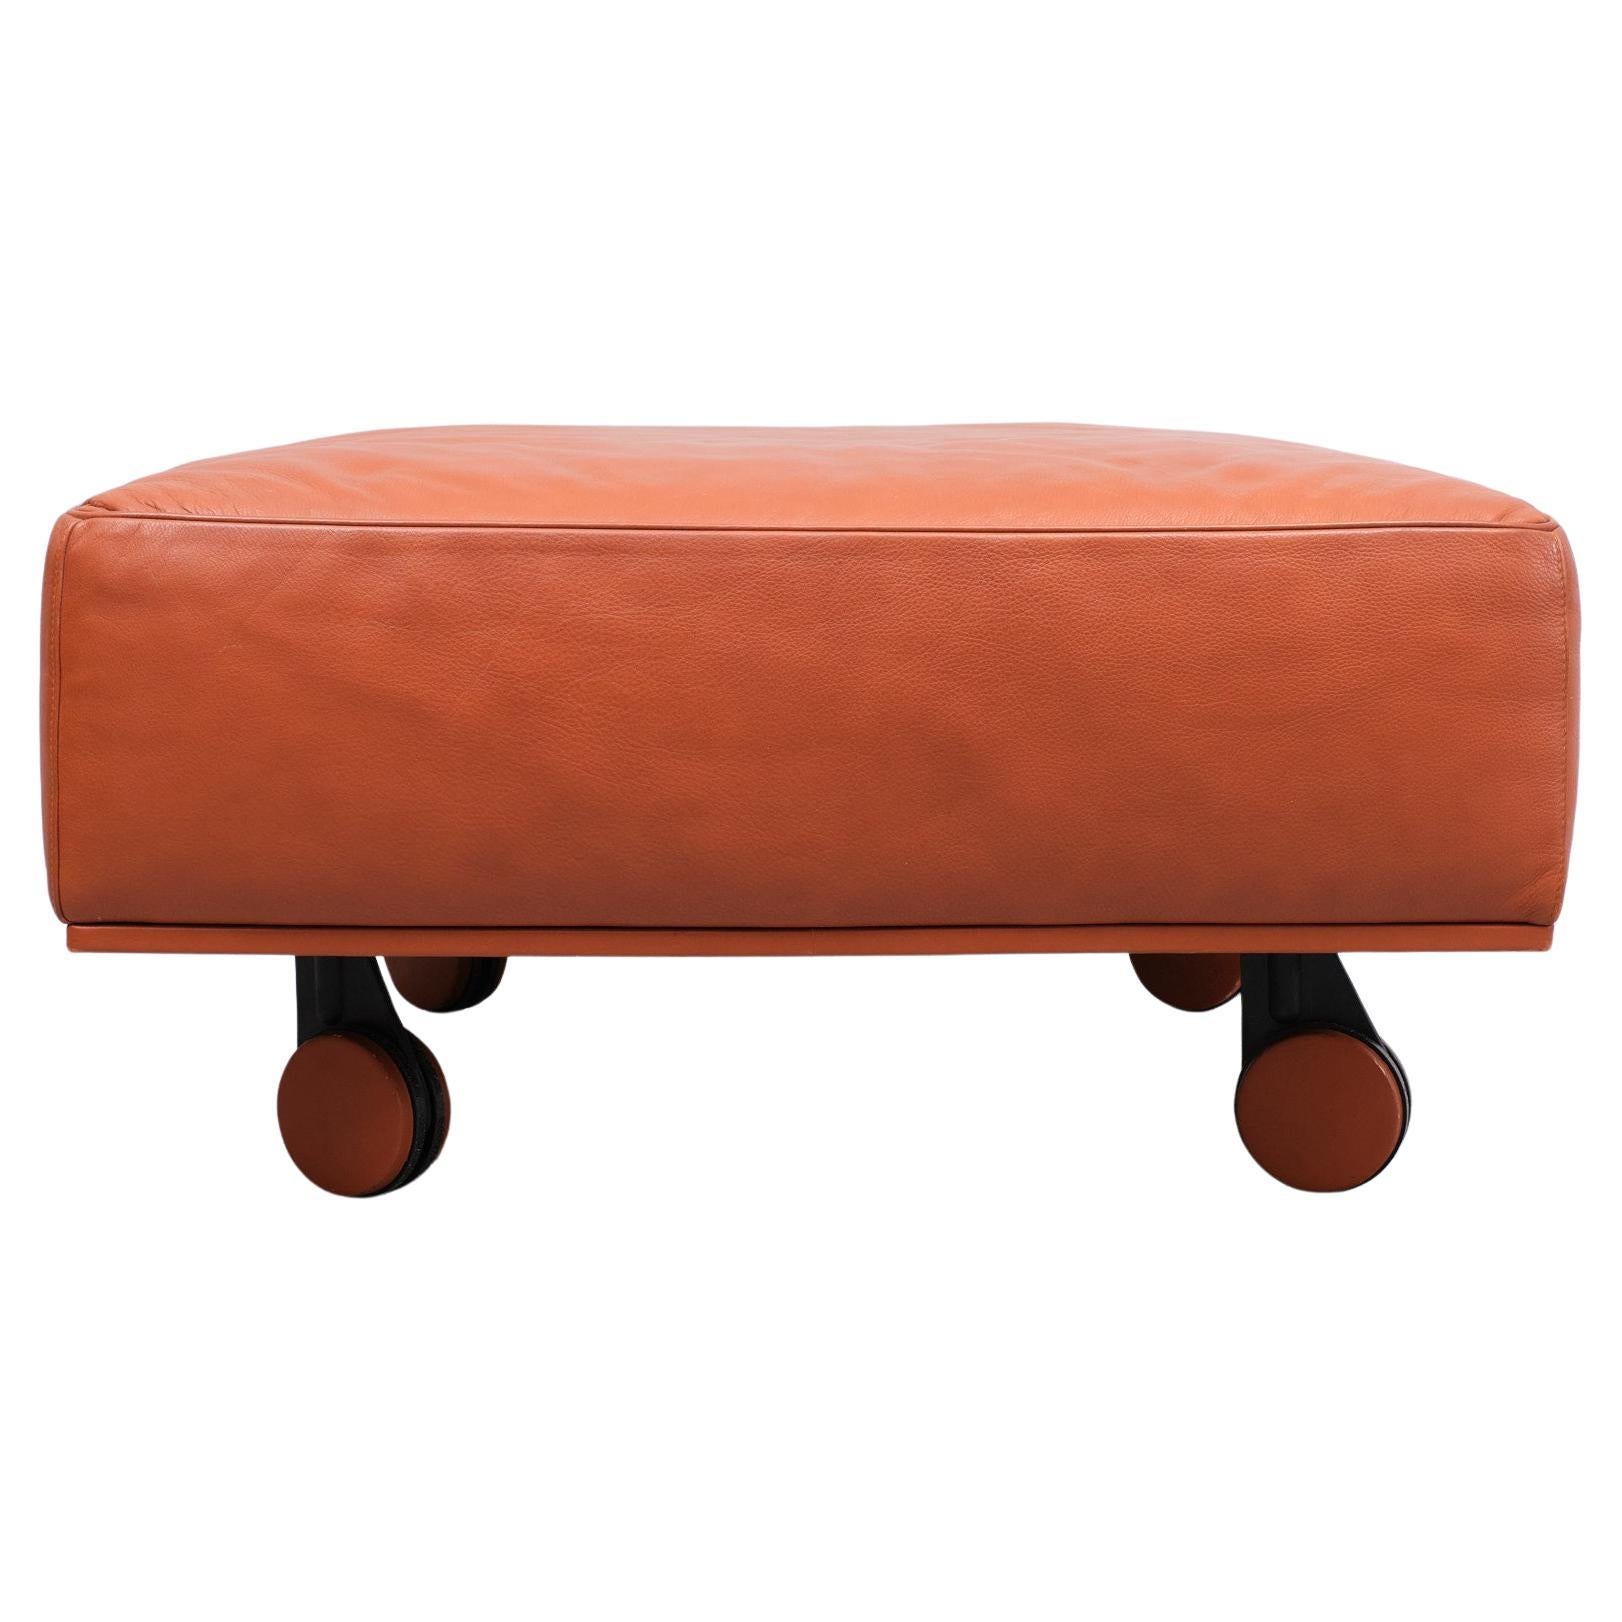 Beautiful top quality Ottoman .on wheels .Original Orange color .Designer Pierluigi Cerri.  Poltrona Frau is widely praised for the phenomenal quality of the leather used in their products. The leather is of such high quality that car brands such as